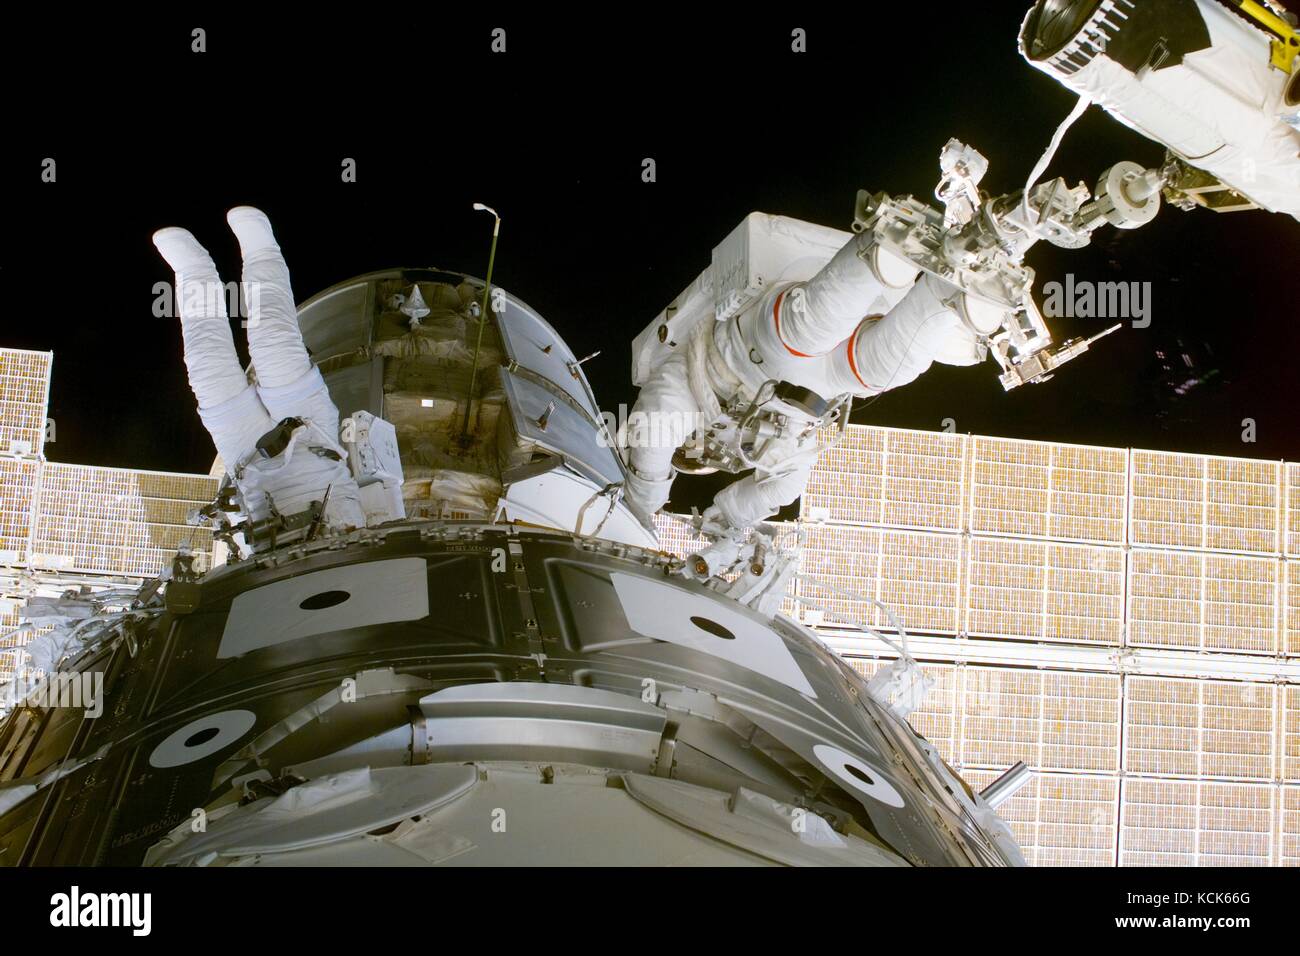 NASA International Space Station Space Shuttle Endeavour STS-88 mission prime crew member American astronauts James Newman (left) and Jerry Ross work on the ISS Zarya and Unity Modules during an extravehicular spacewalk December 8, 1998 in Earth orbit.  (photo by NASA Photo  via Planetpix) Stock Photo